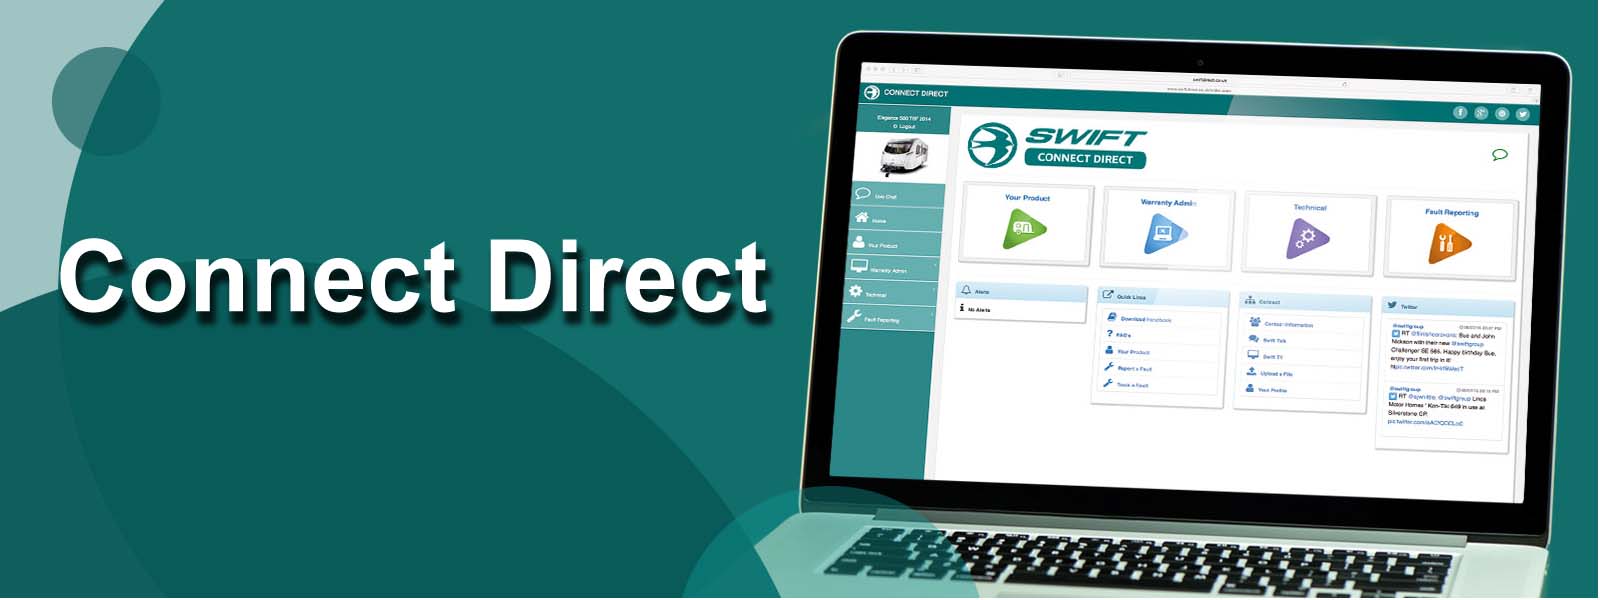 Connect direct